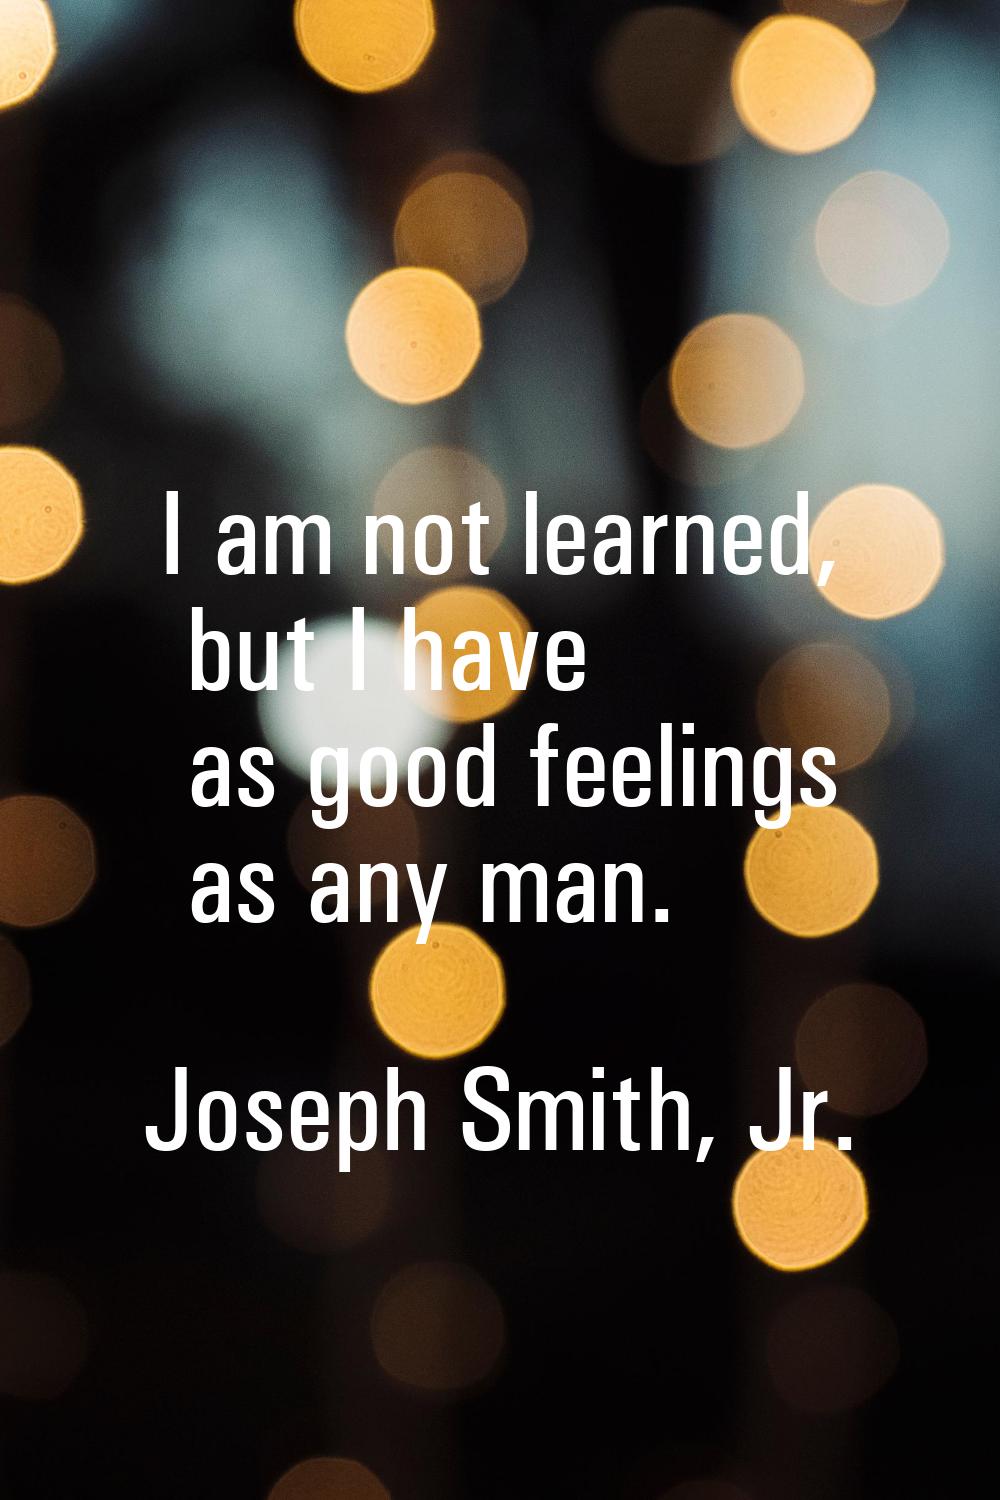 I am not learned, but I have as good feelings as any man.